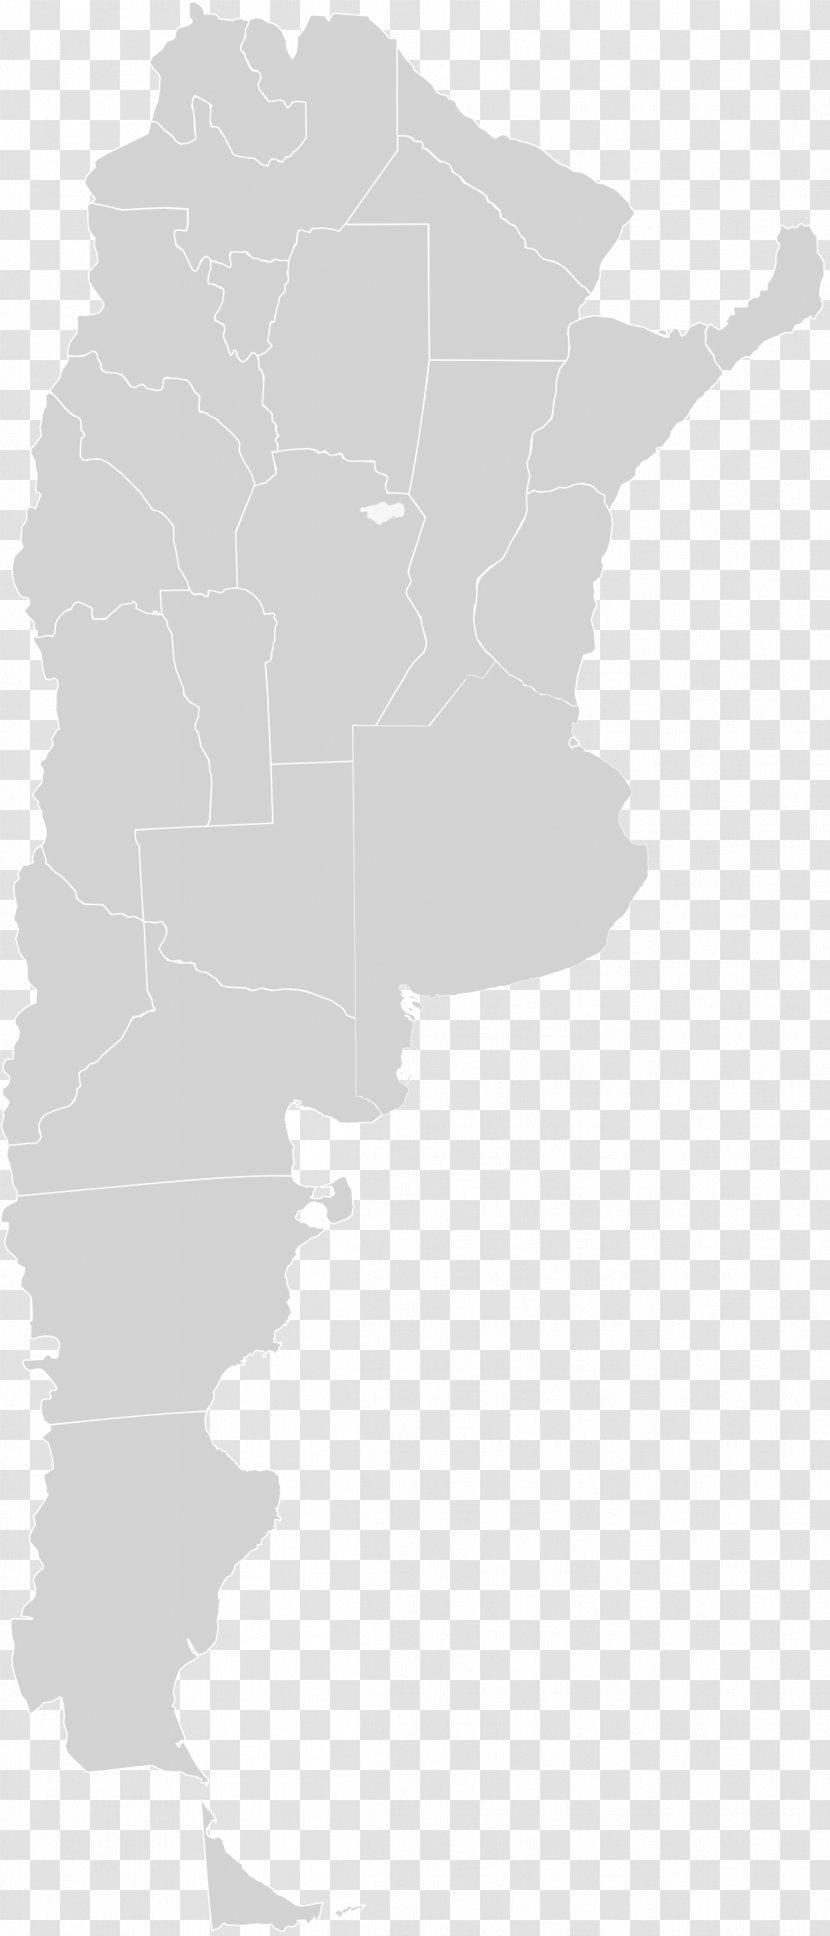 Argentina Vector Graphics Map Stock Photography Illustration - Black And White Transparent PNG